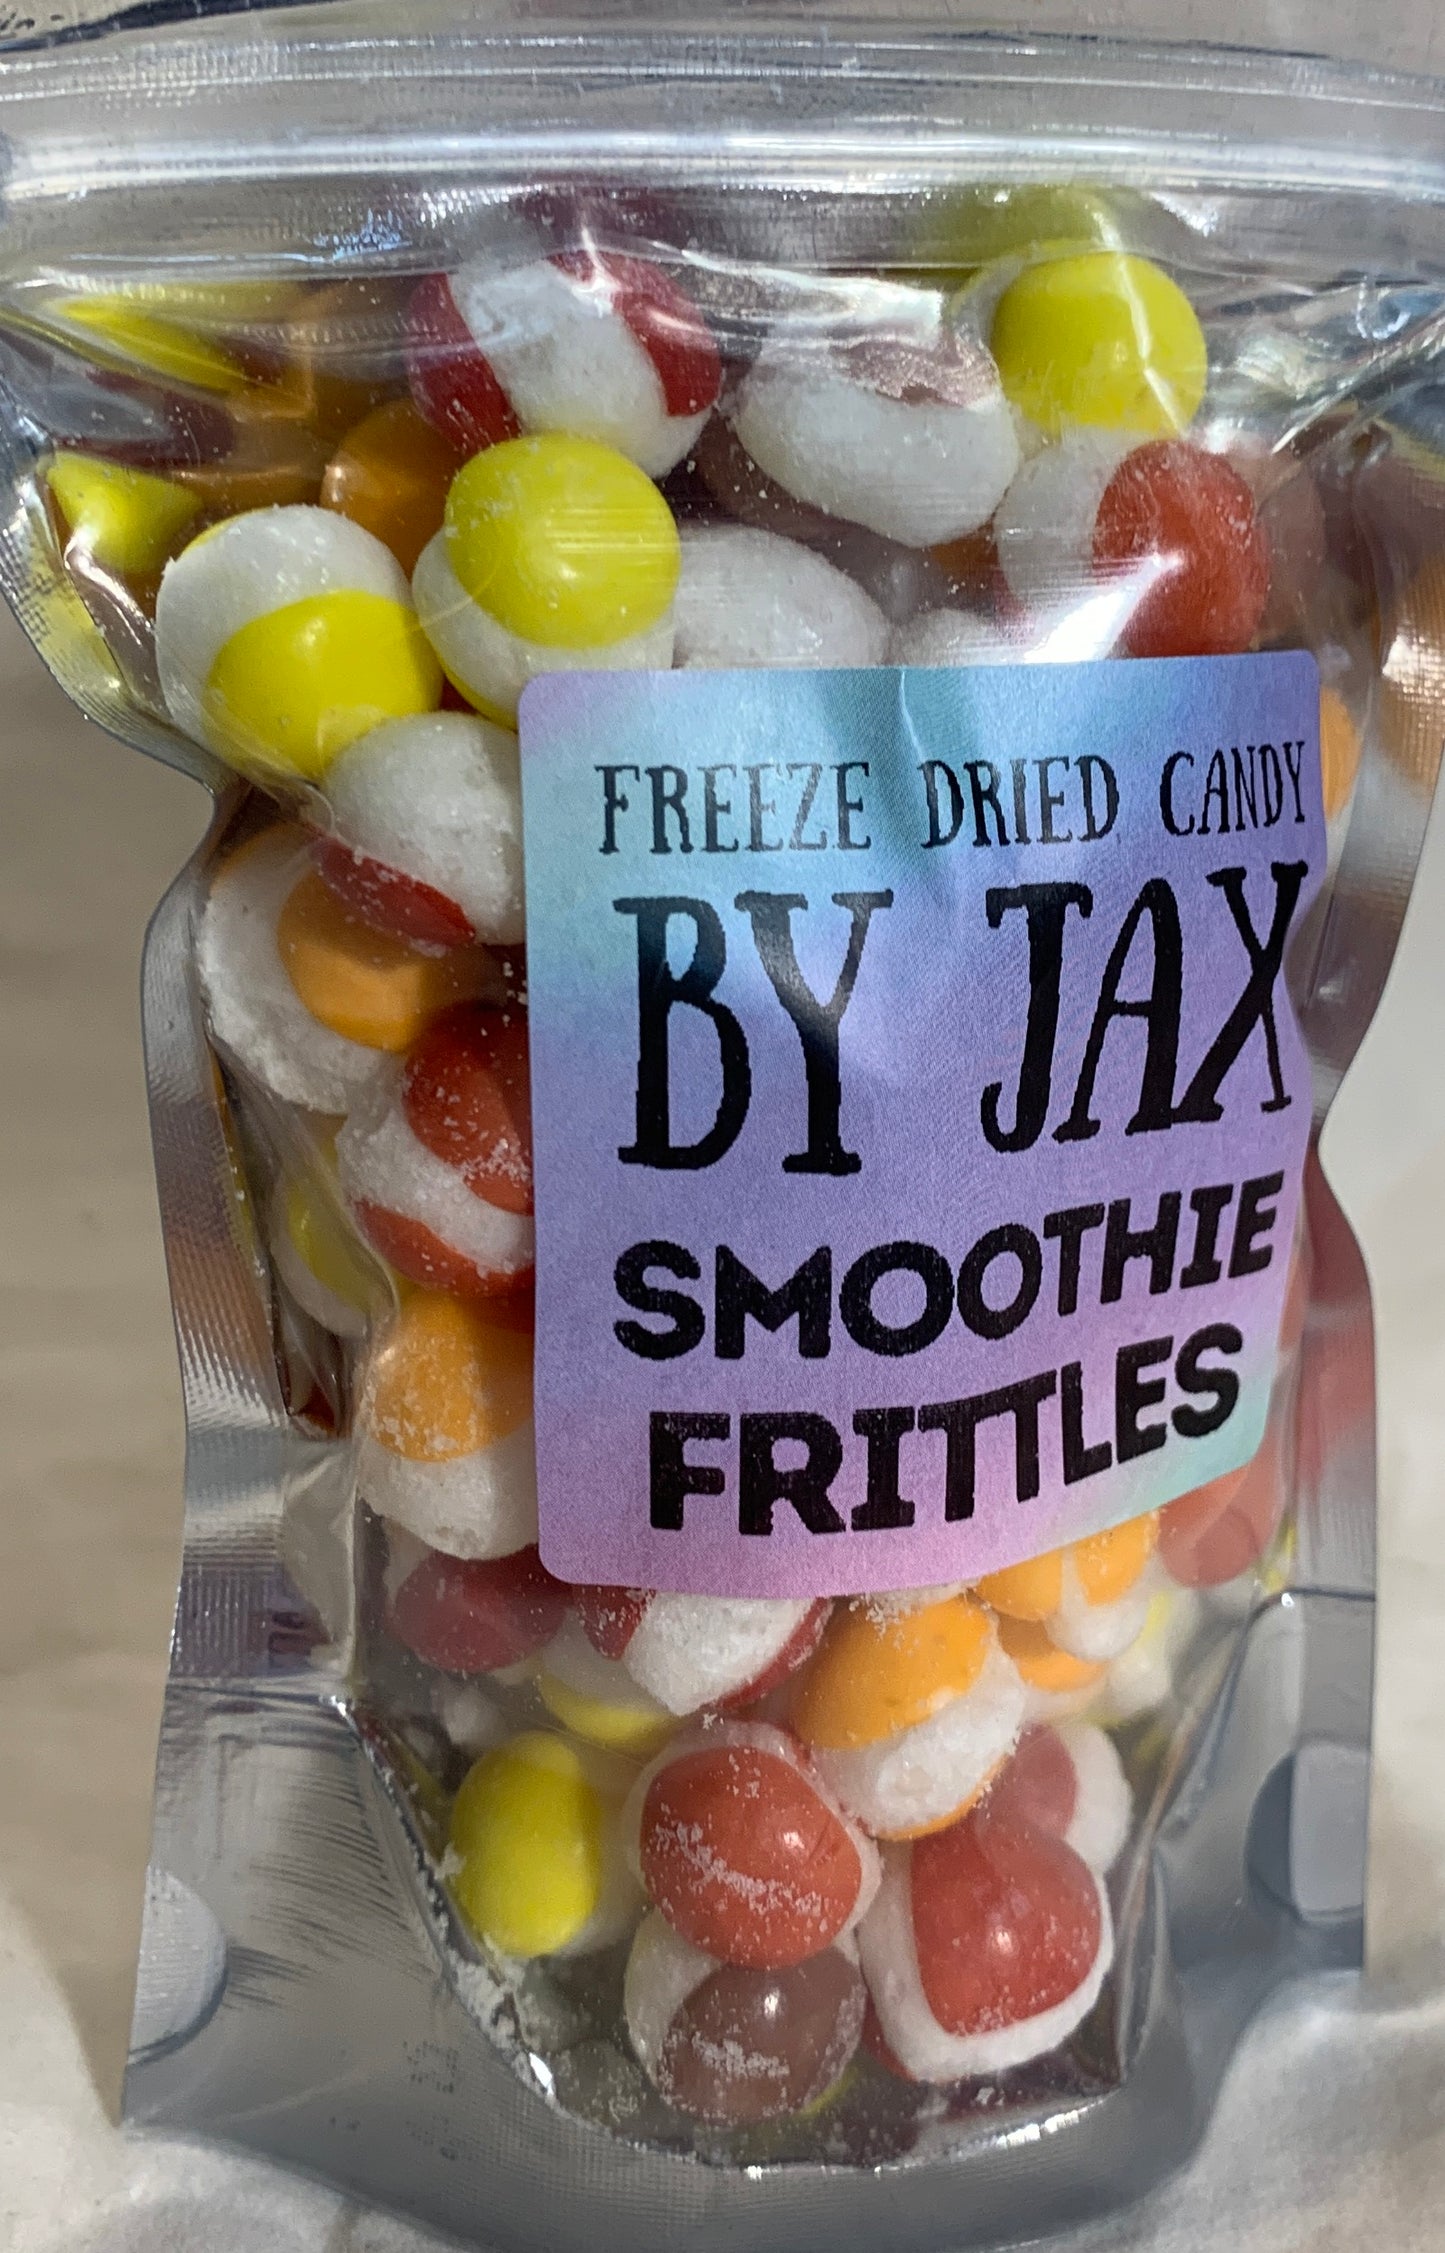 Freeze Dried Smoothie Frittles